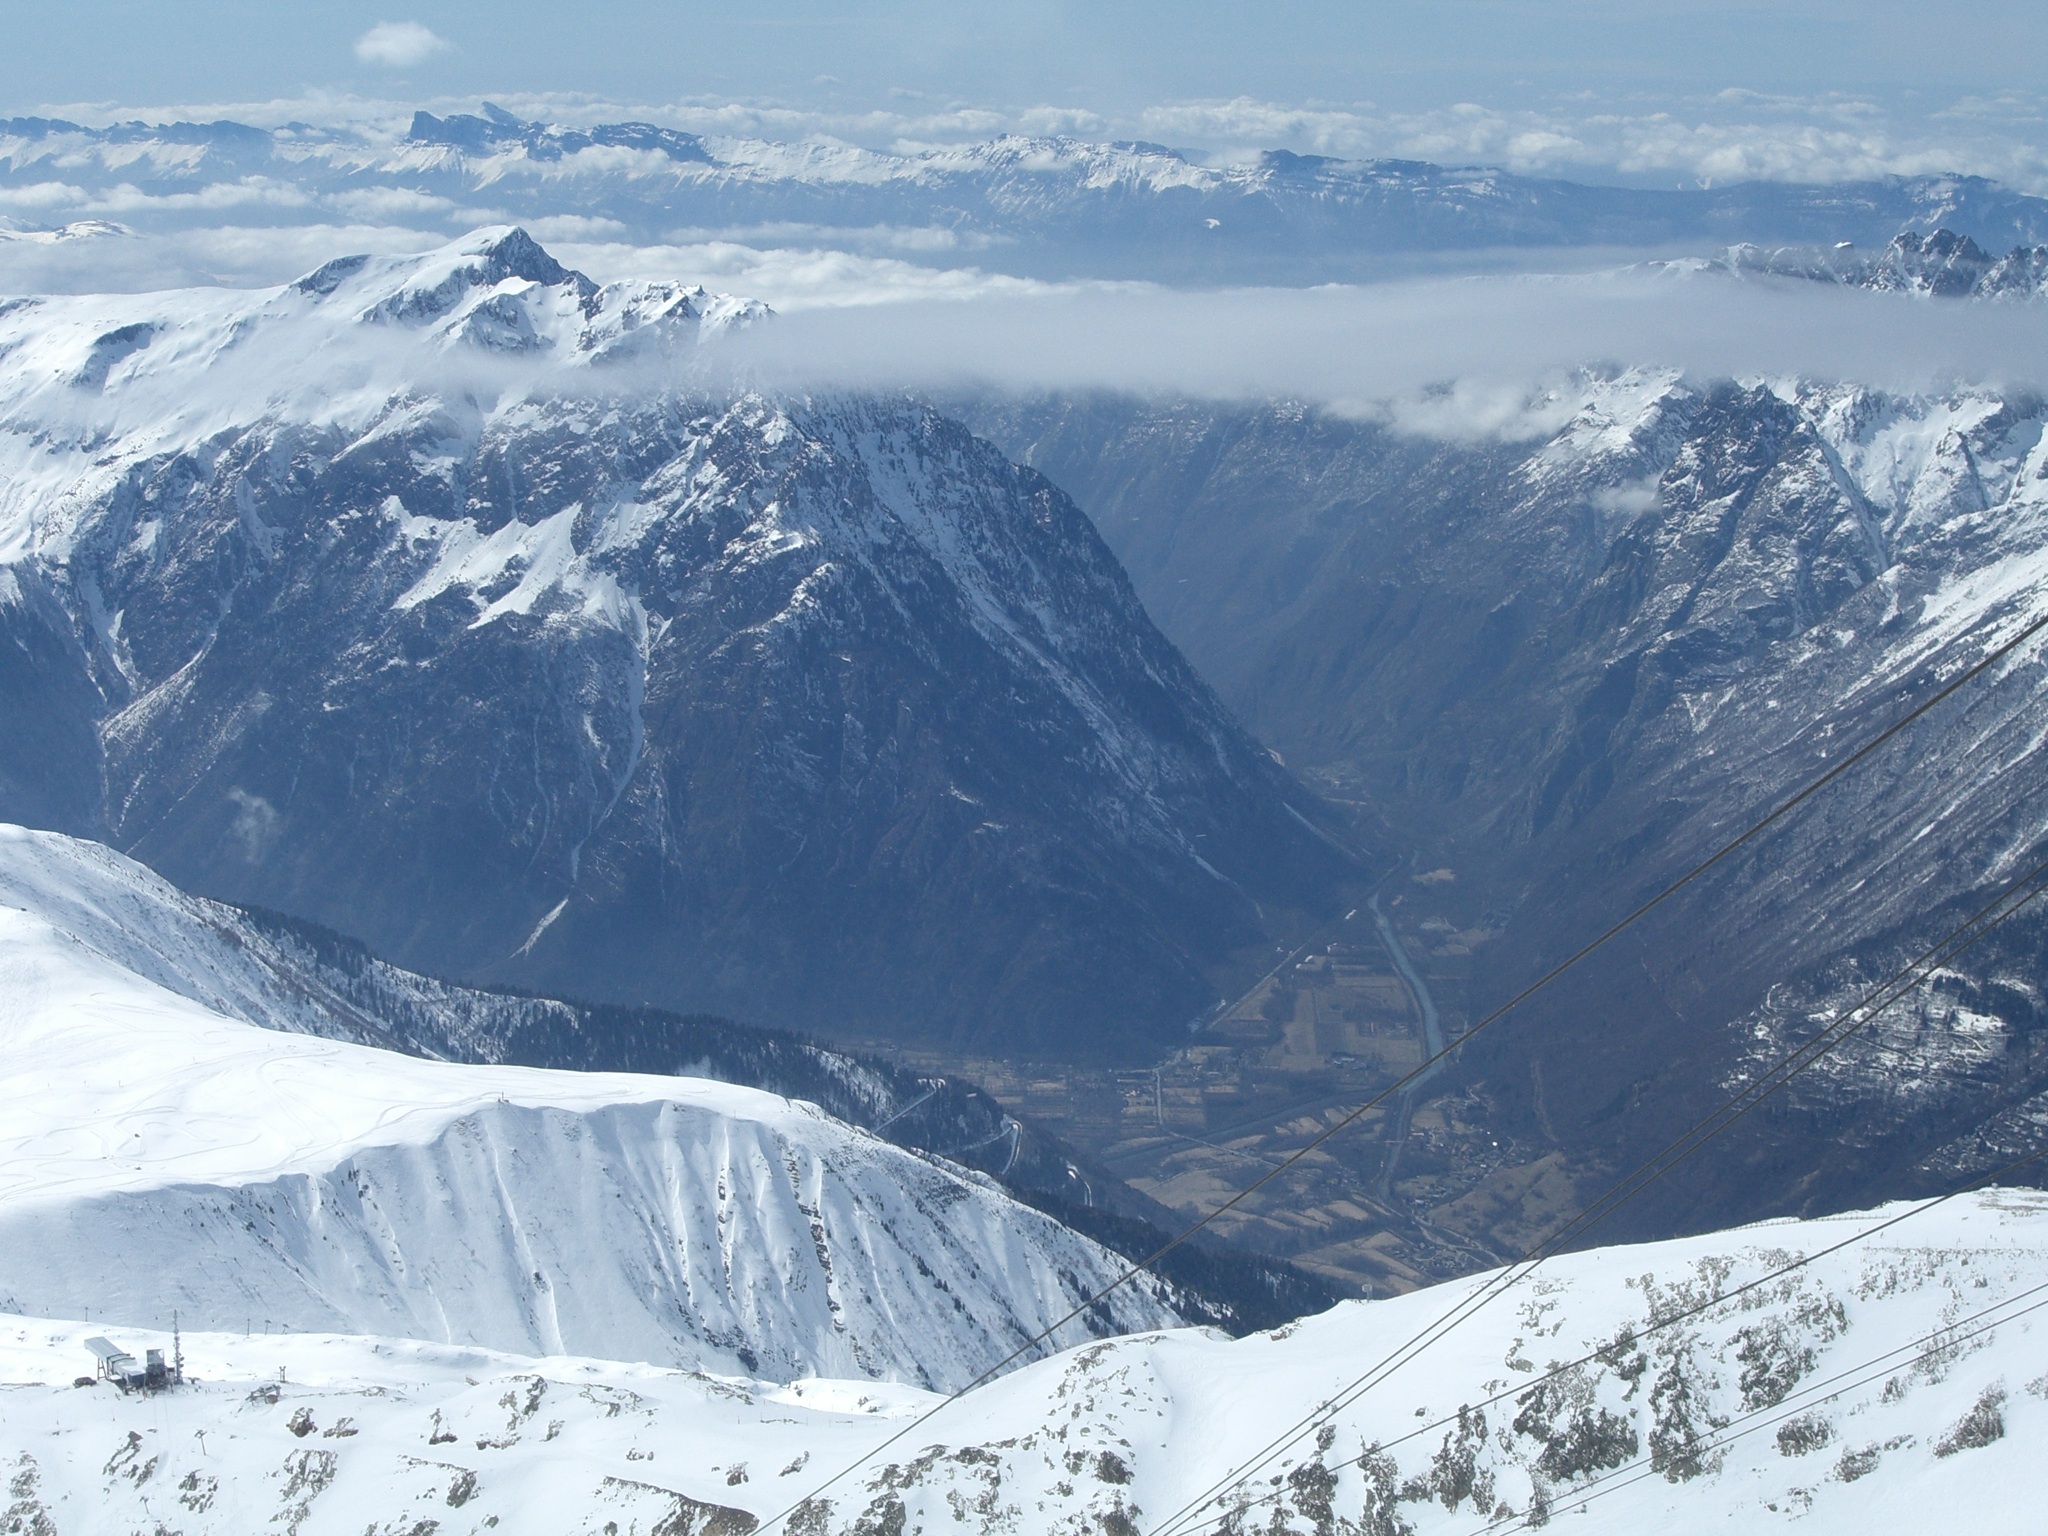 Looking back from Pic Blanc, Alpe d'Huez